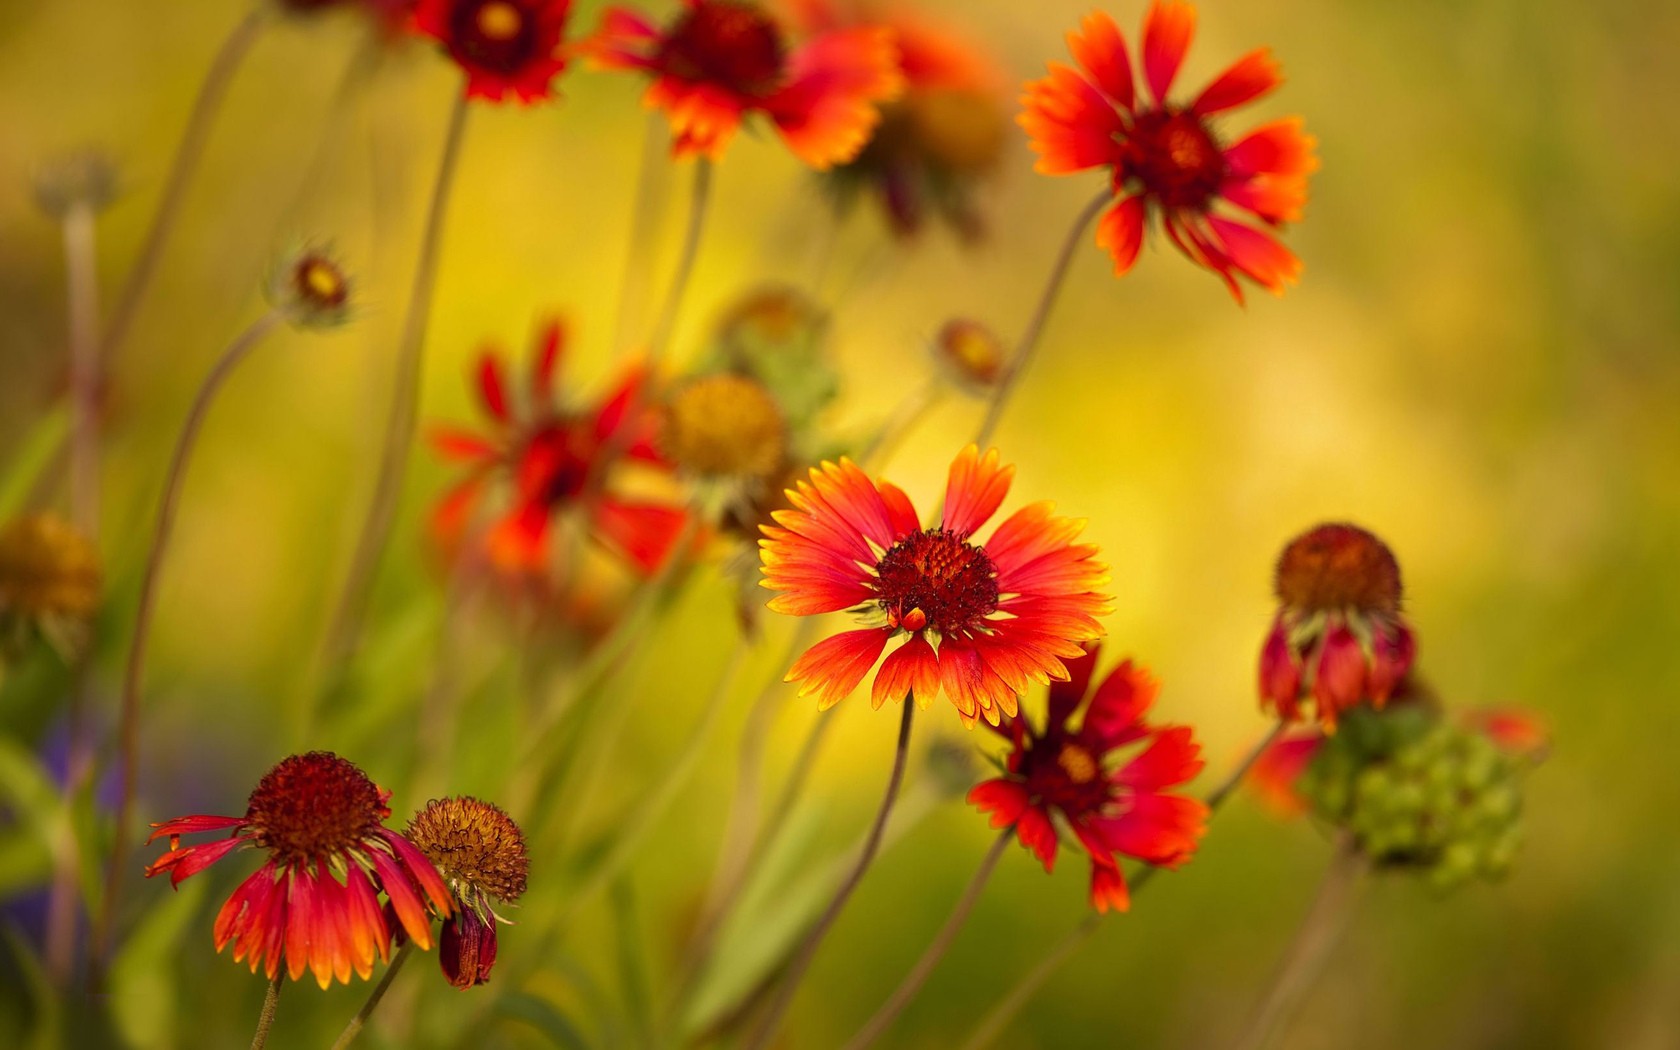 red flowers photo hd